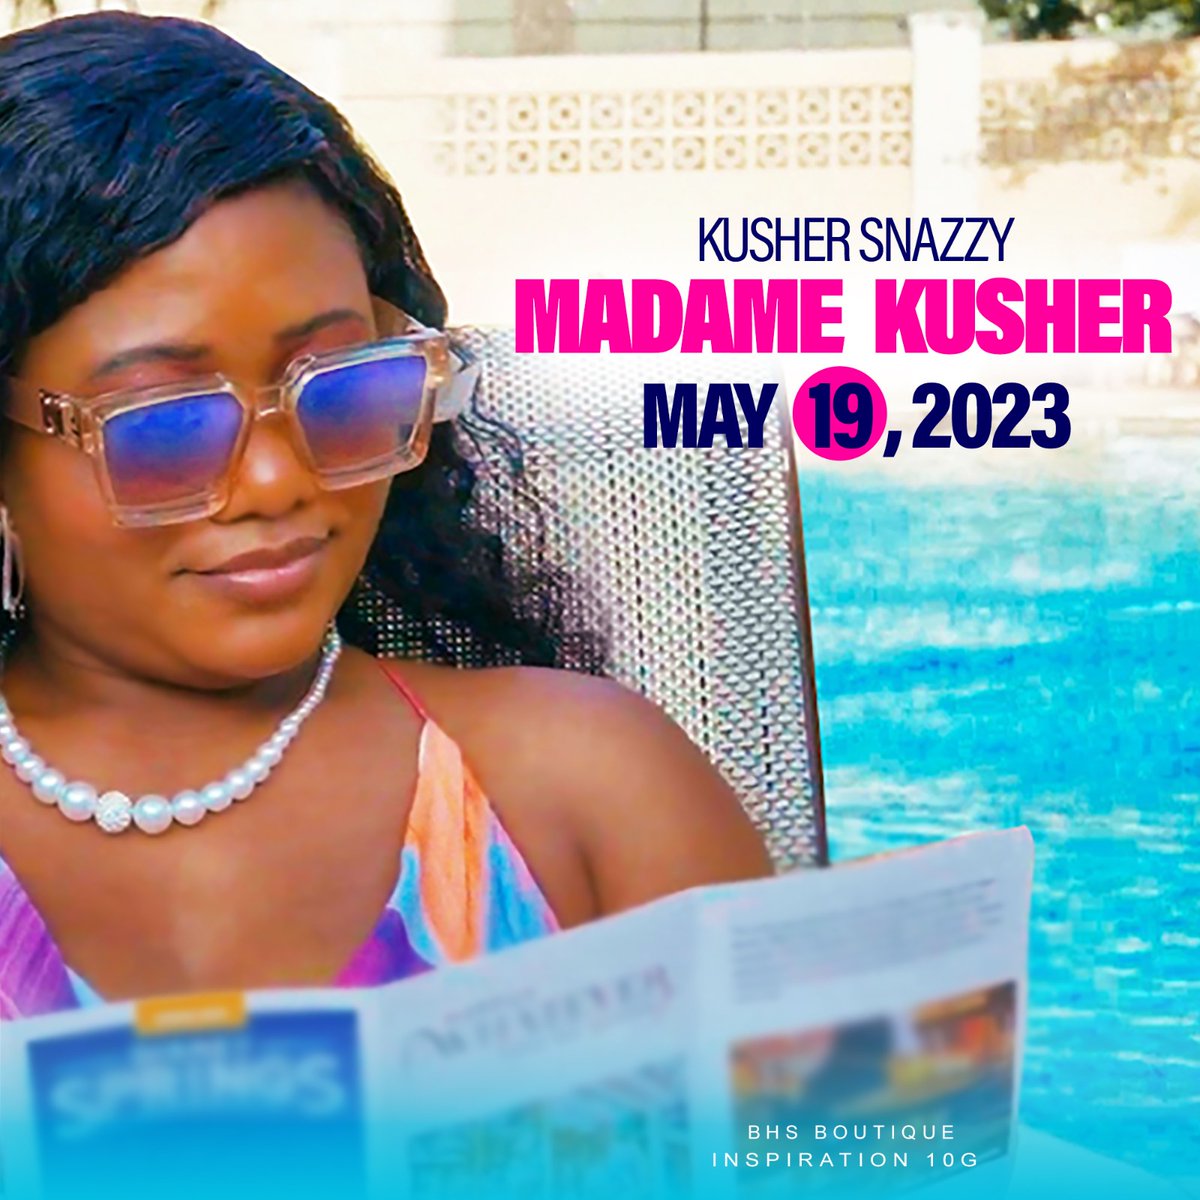 Madame kusher music video coming this Friday. Stay tuned. Share, like and comment.. youtu.be/UEbIIEvNJgI